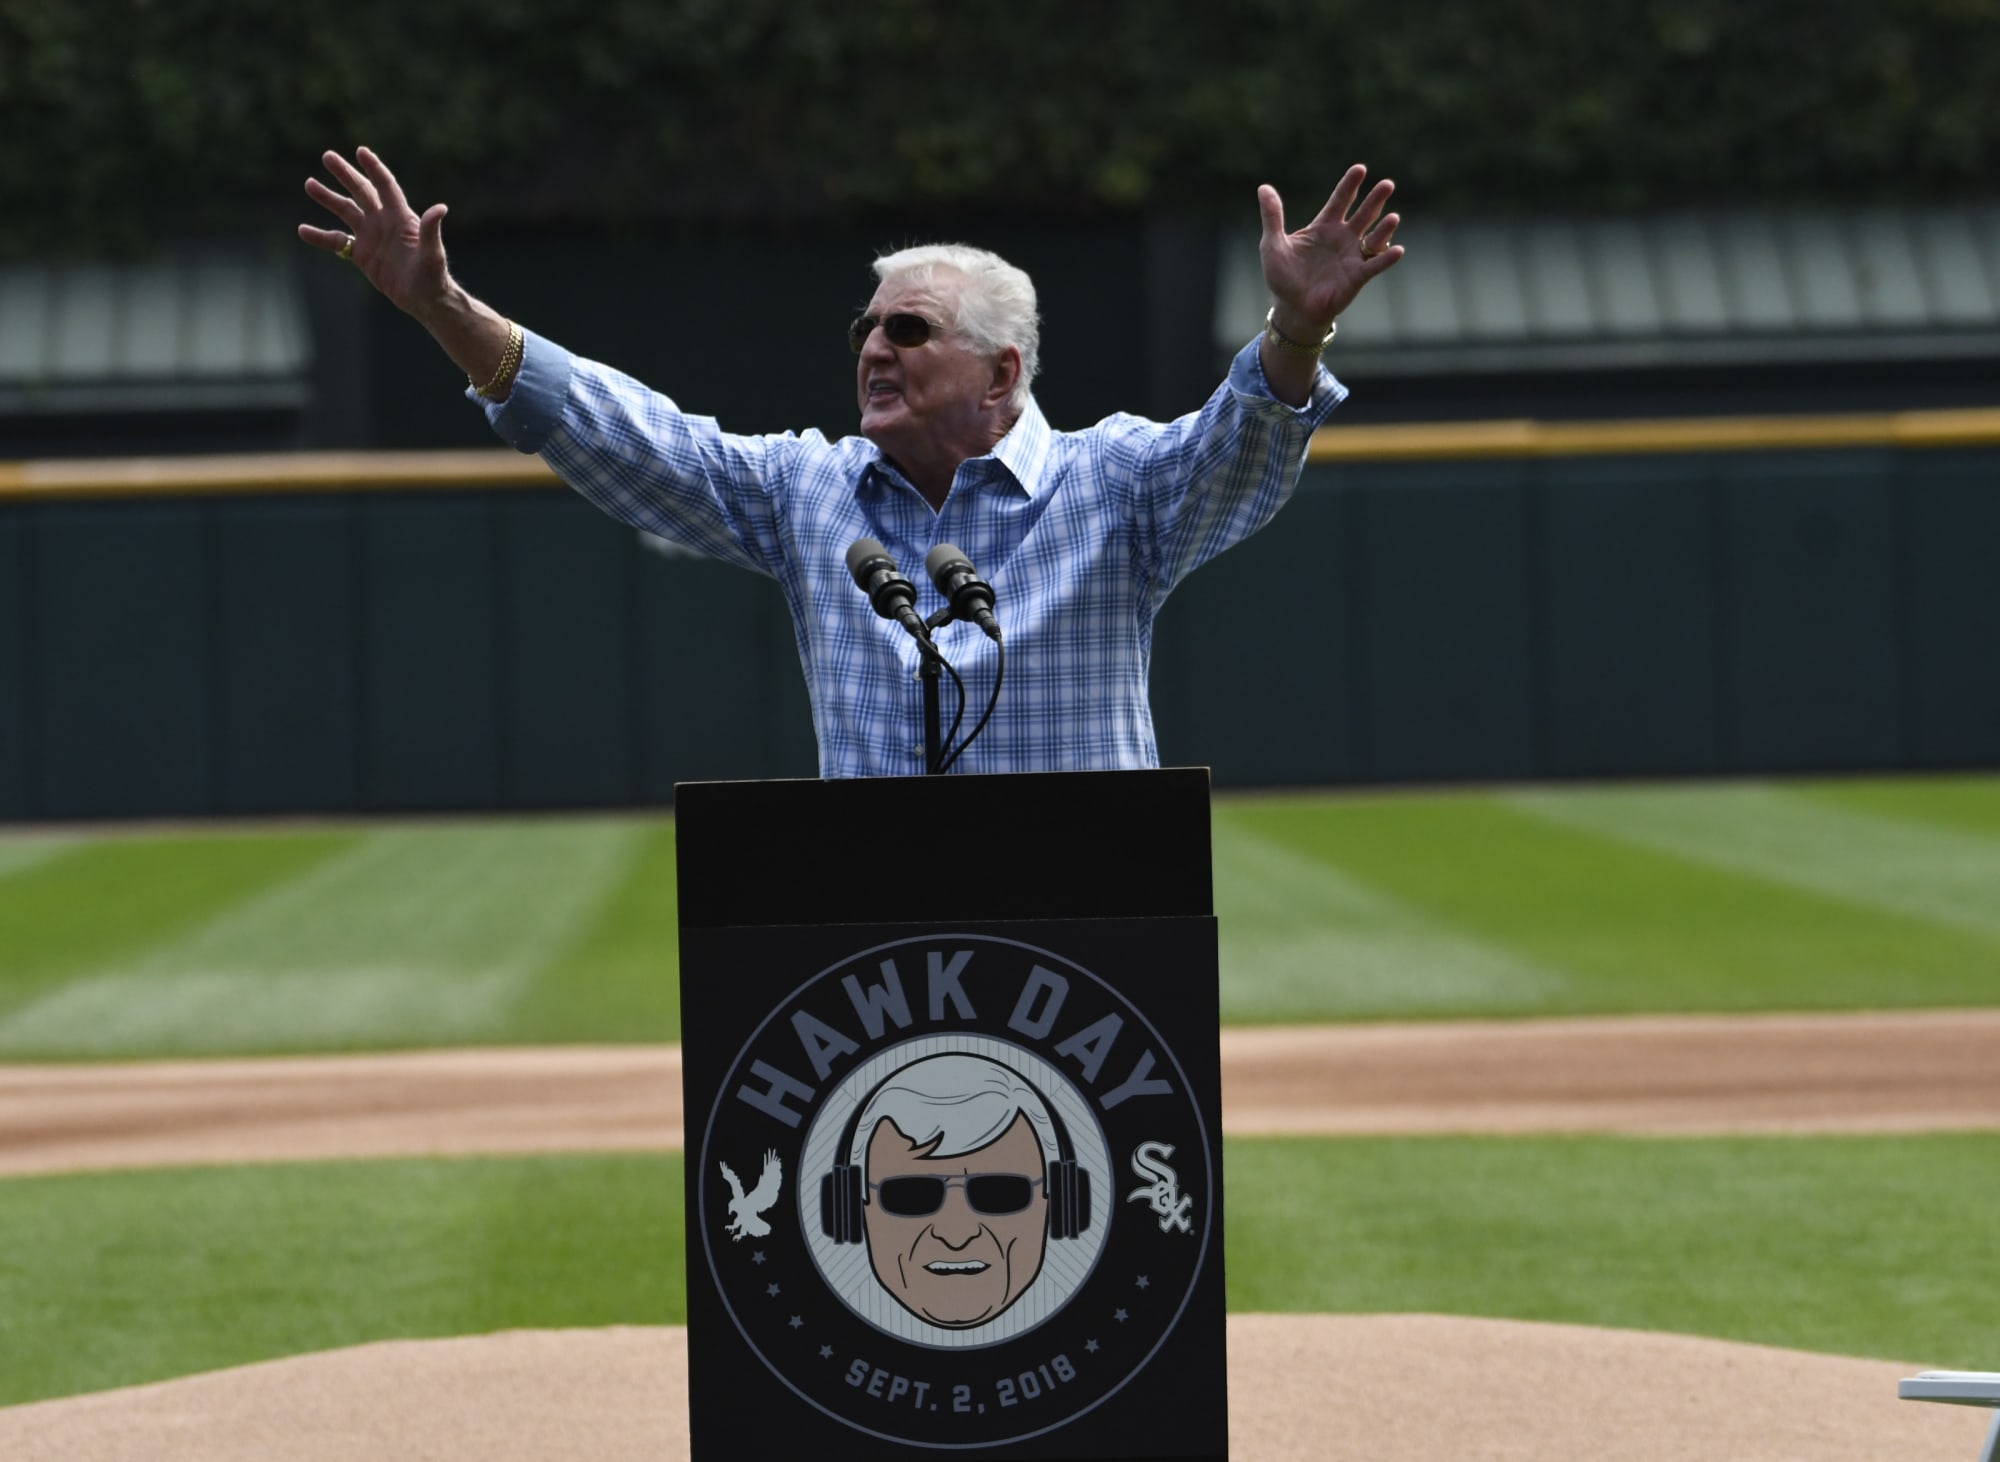 White Sox Broadcaster Hawk Harrelson is in the Hall of Fame